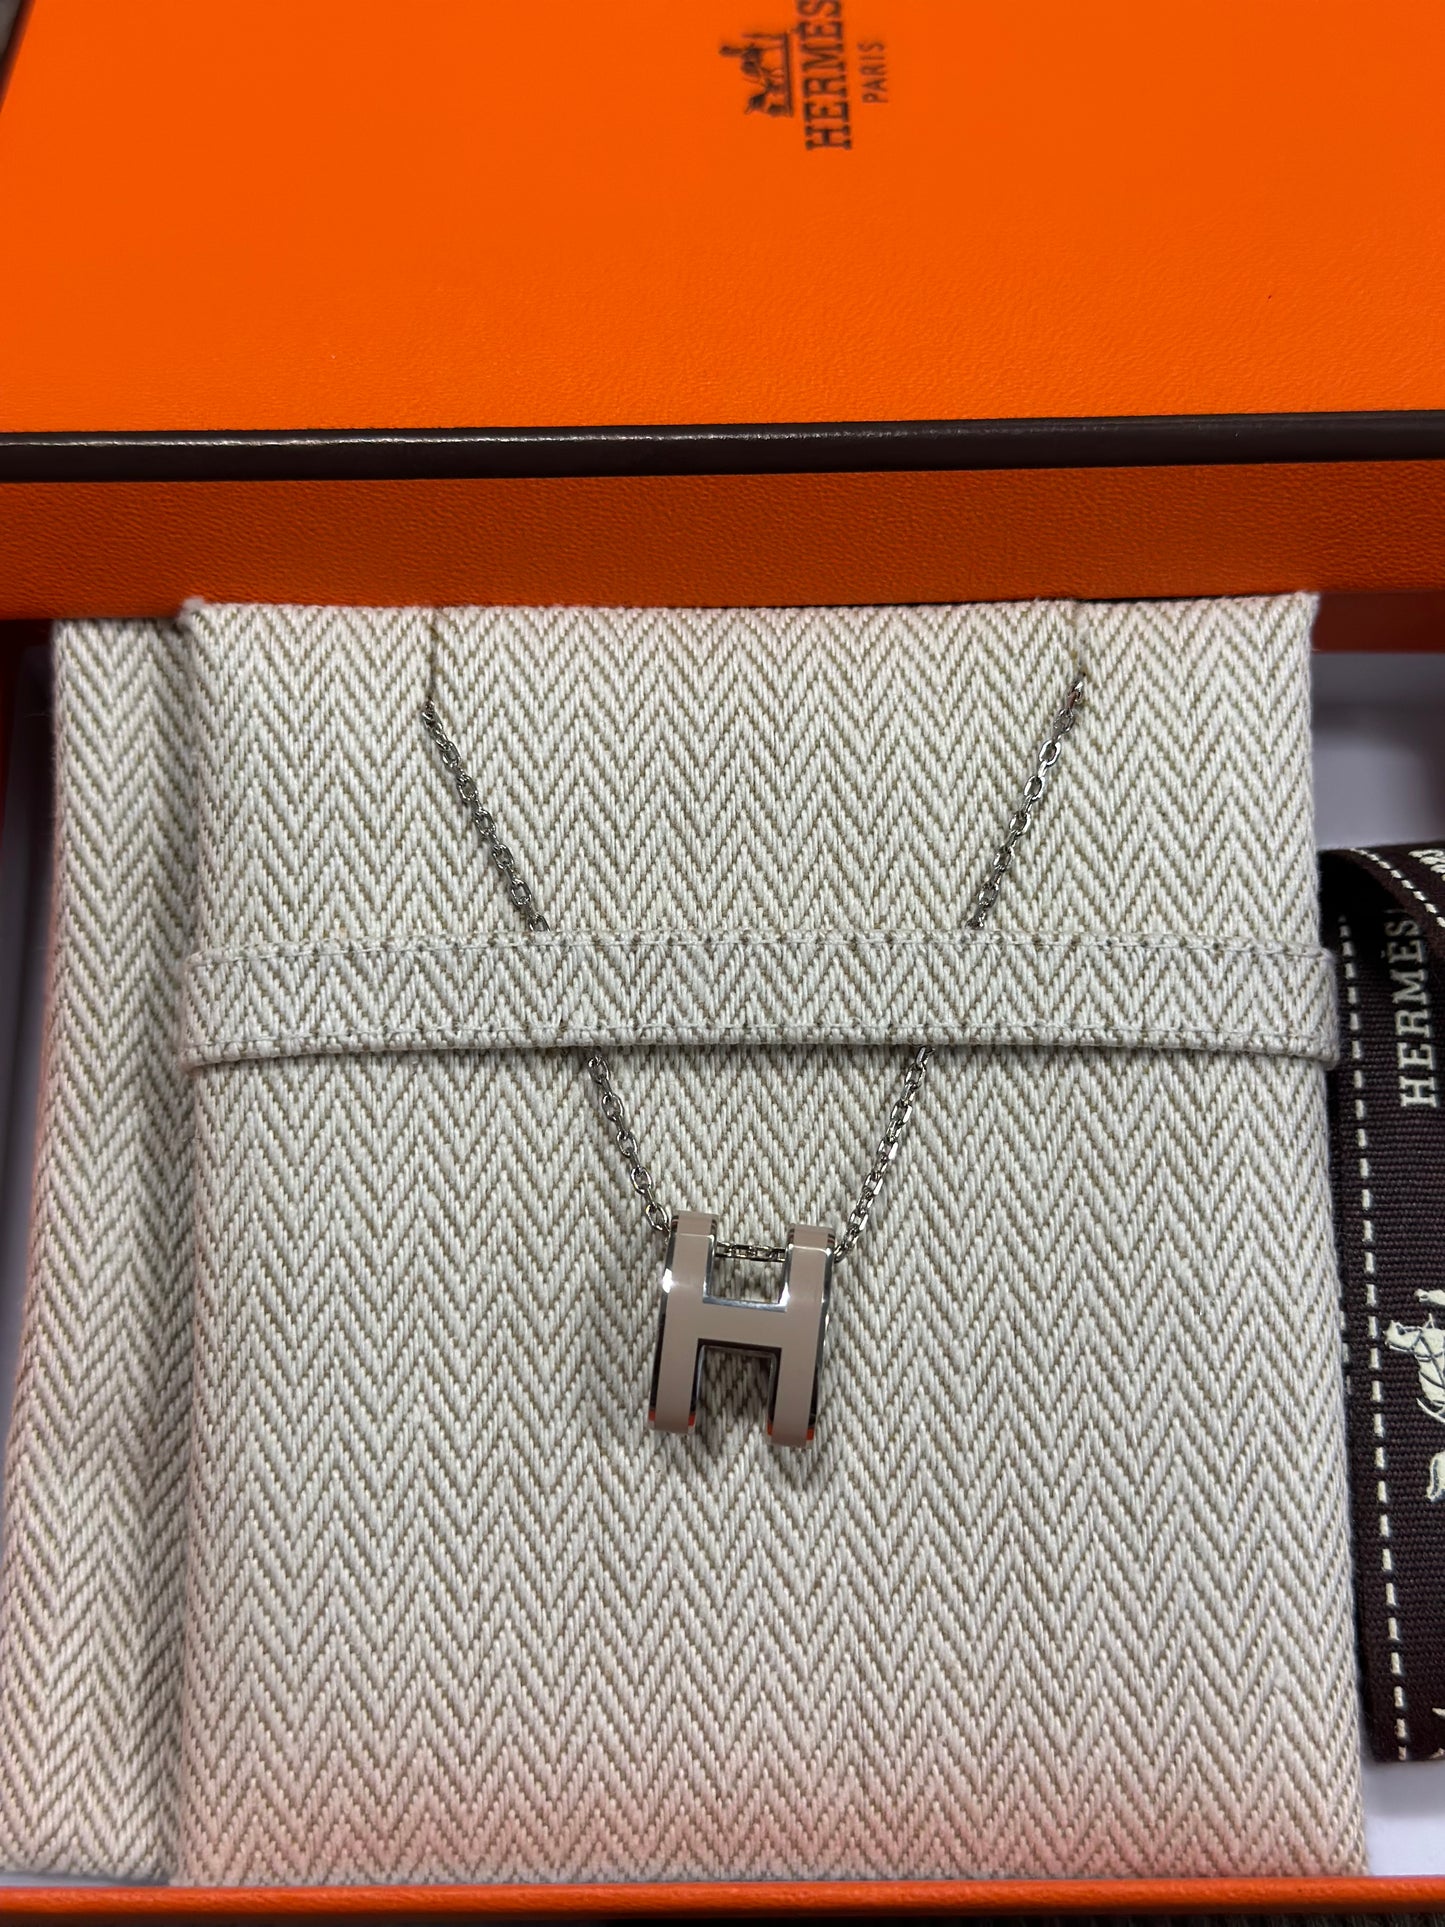 Hermes - ACC - Pop H Necklace Standard Size  - Maronglace Silver - H147991FP 55  - £385.00